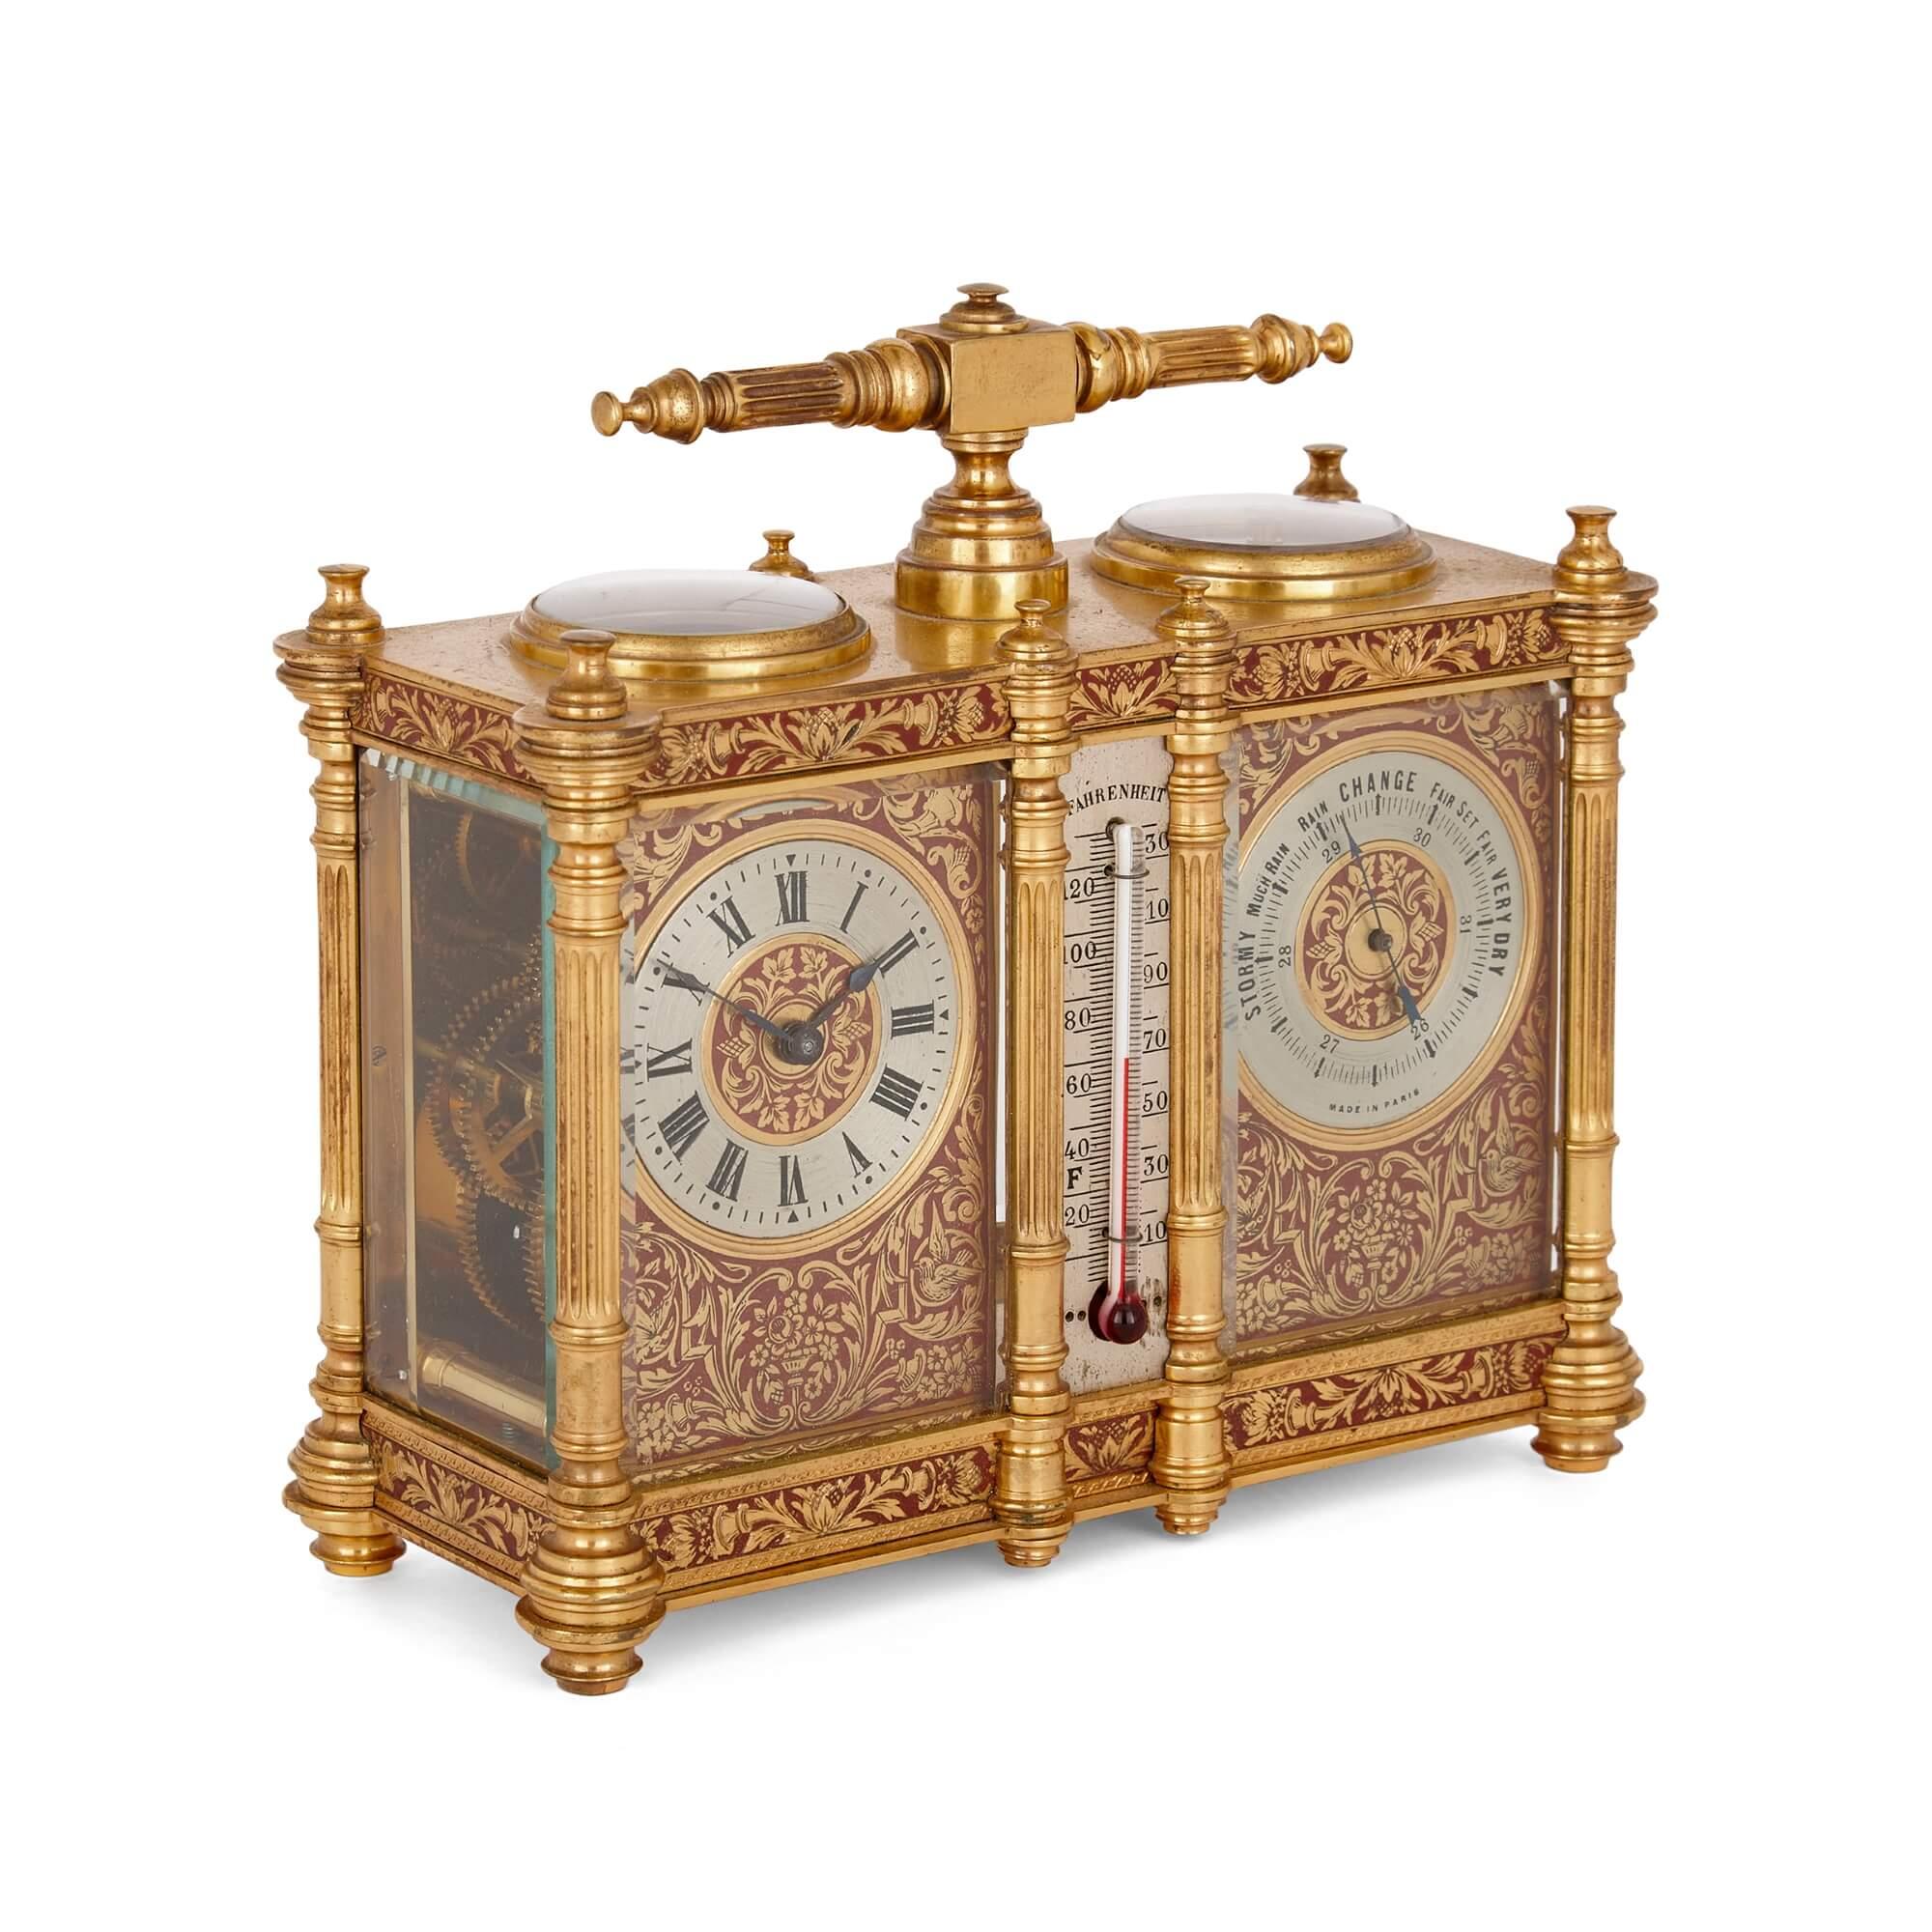 French brass and red enamel compendium carriage clock and barometer
French, late 19th Century
Height 16cm, width 17cm, depth 7cm

With the clock to the left and barometer to the right, this beautiful compendium clock and barometer, designed as a